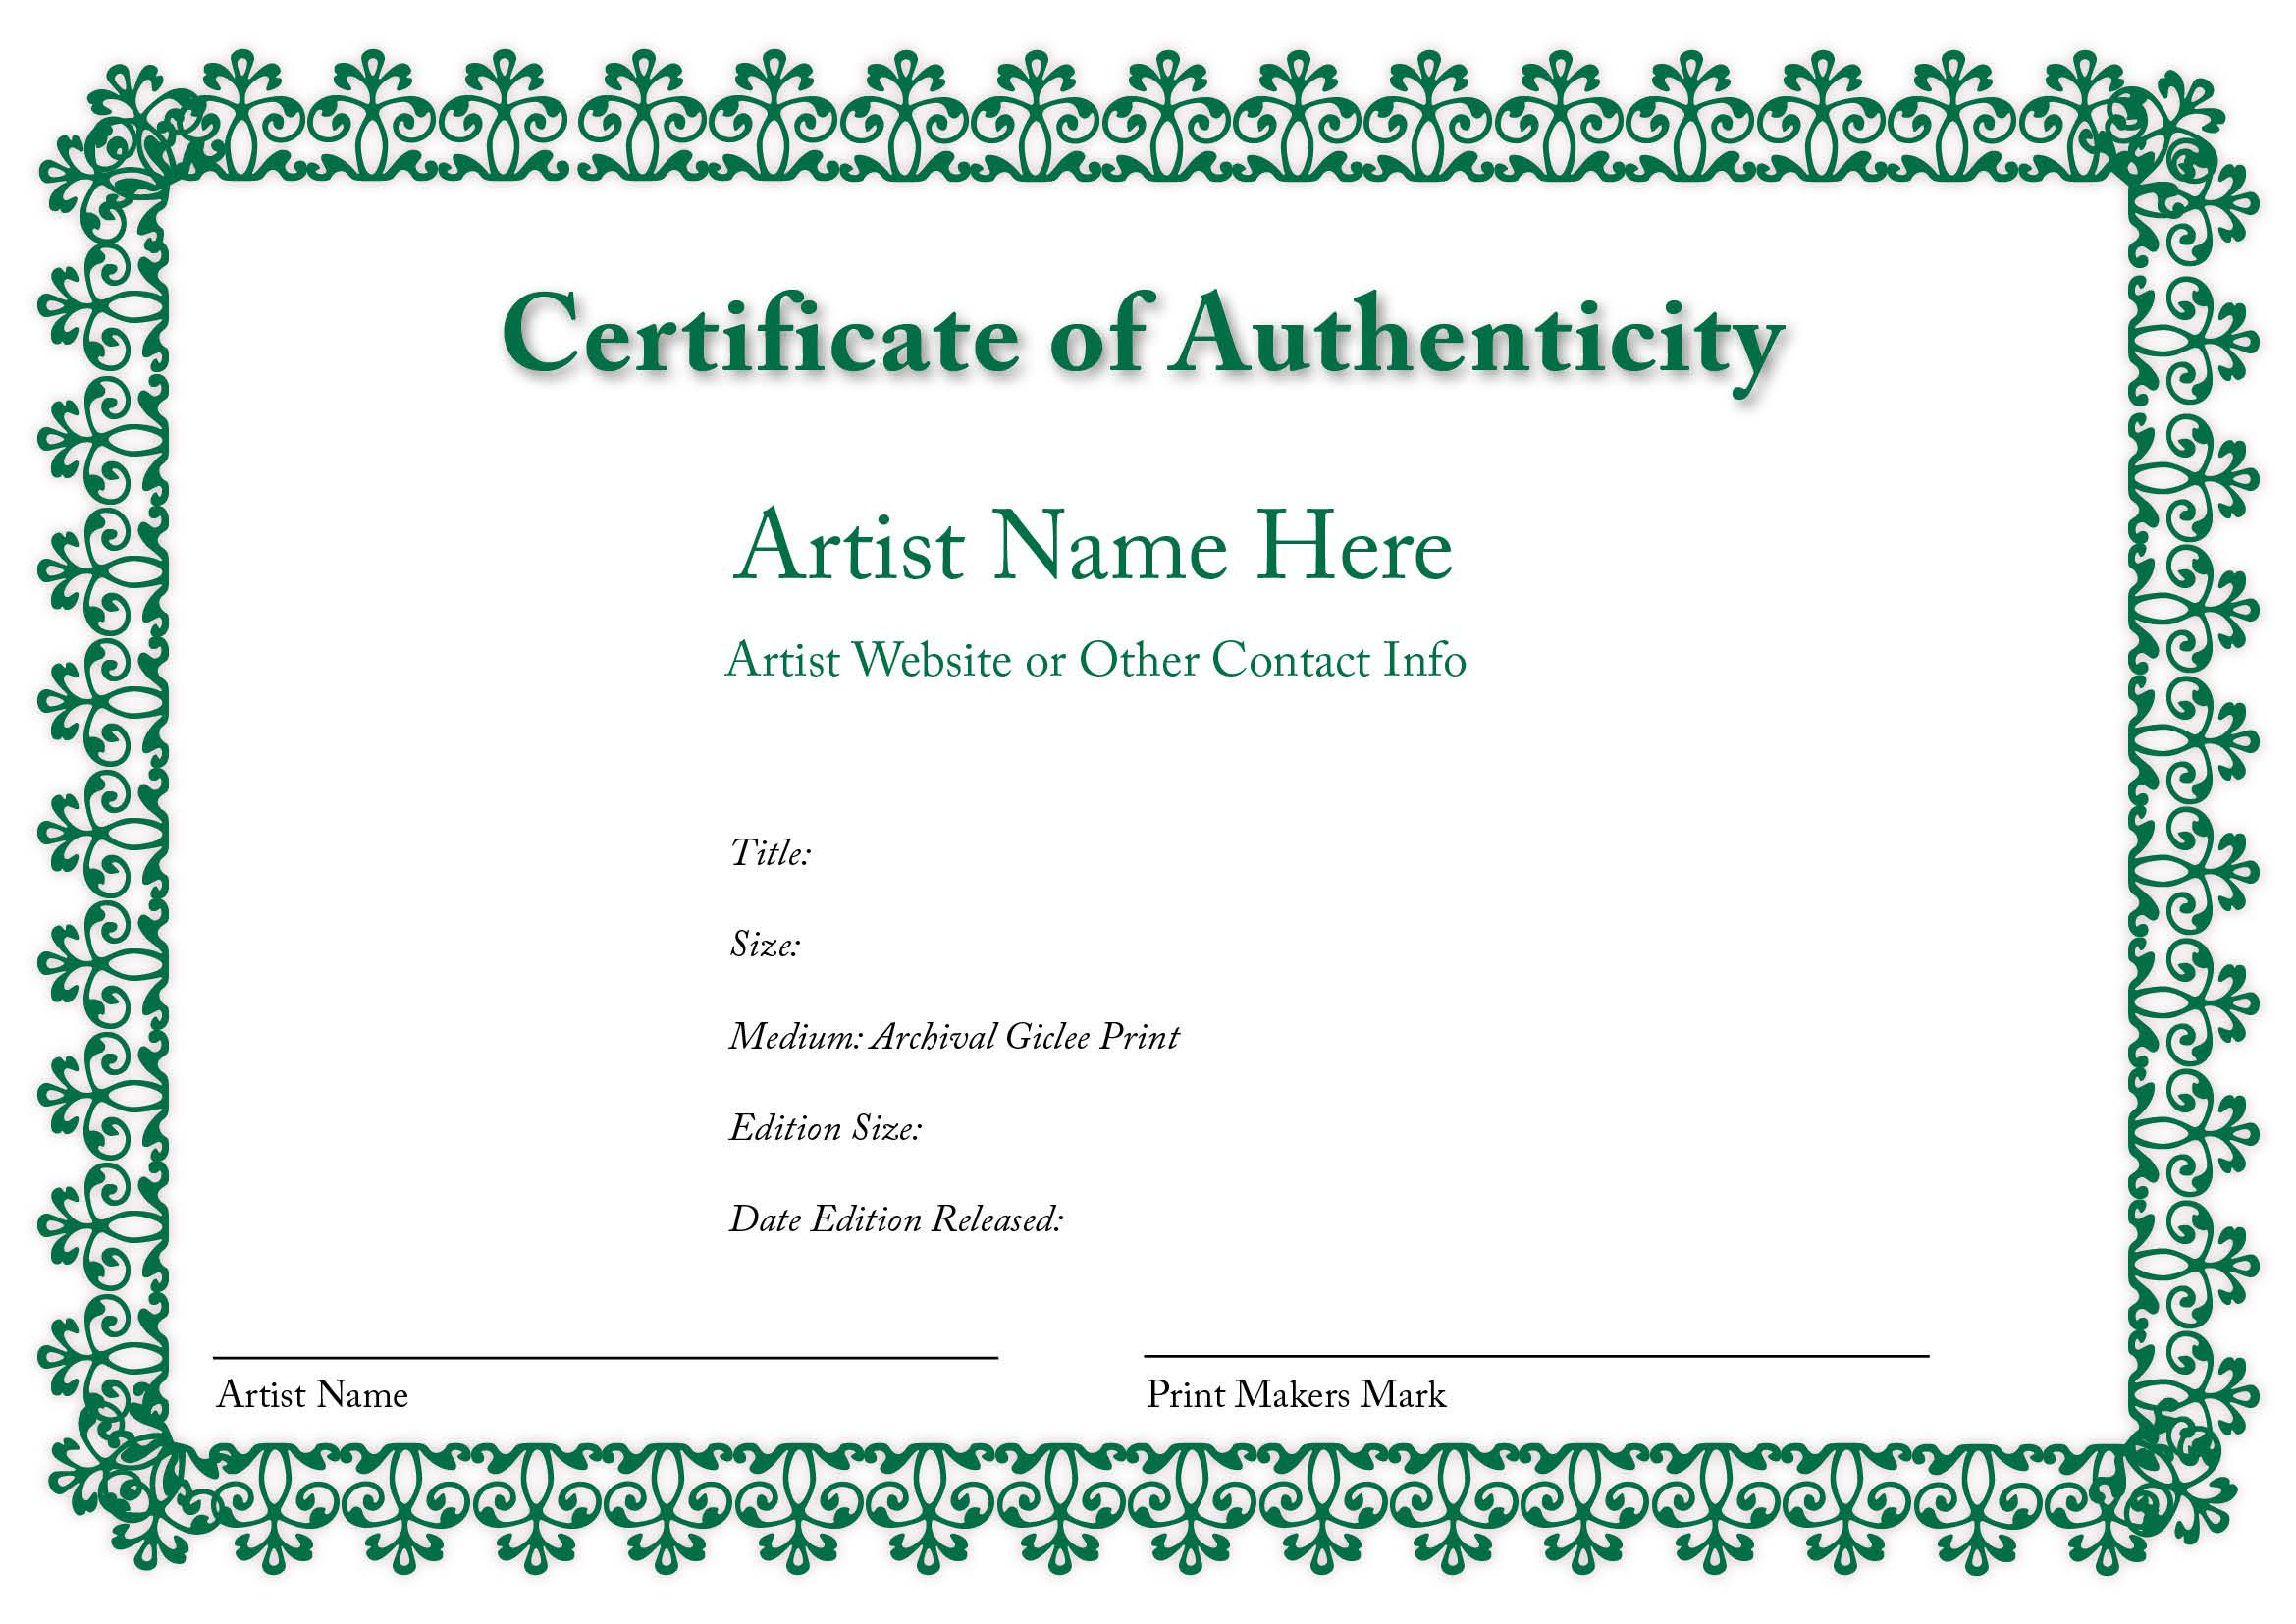 Certificate Of Authenticity Of An Art Print In 2019 Regarding Certificate Of Authenticity Template